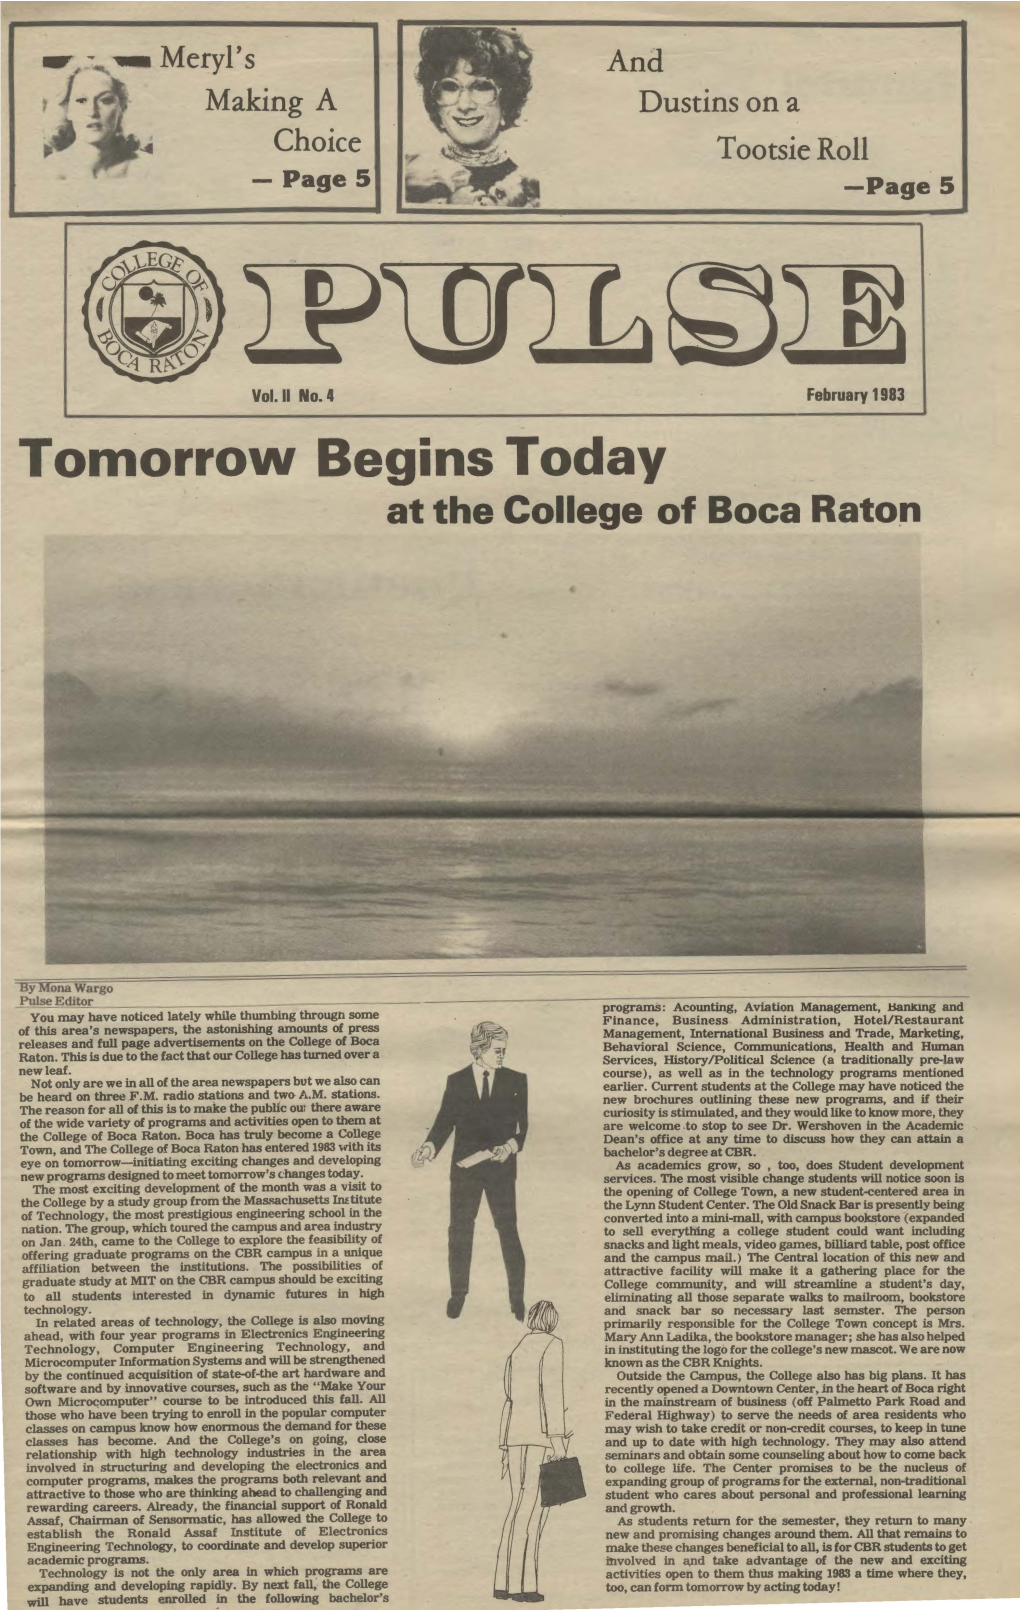 February 1983 Tomorrow Begins Today at the College of Boca Rato.N